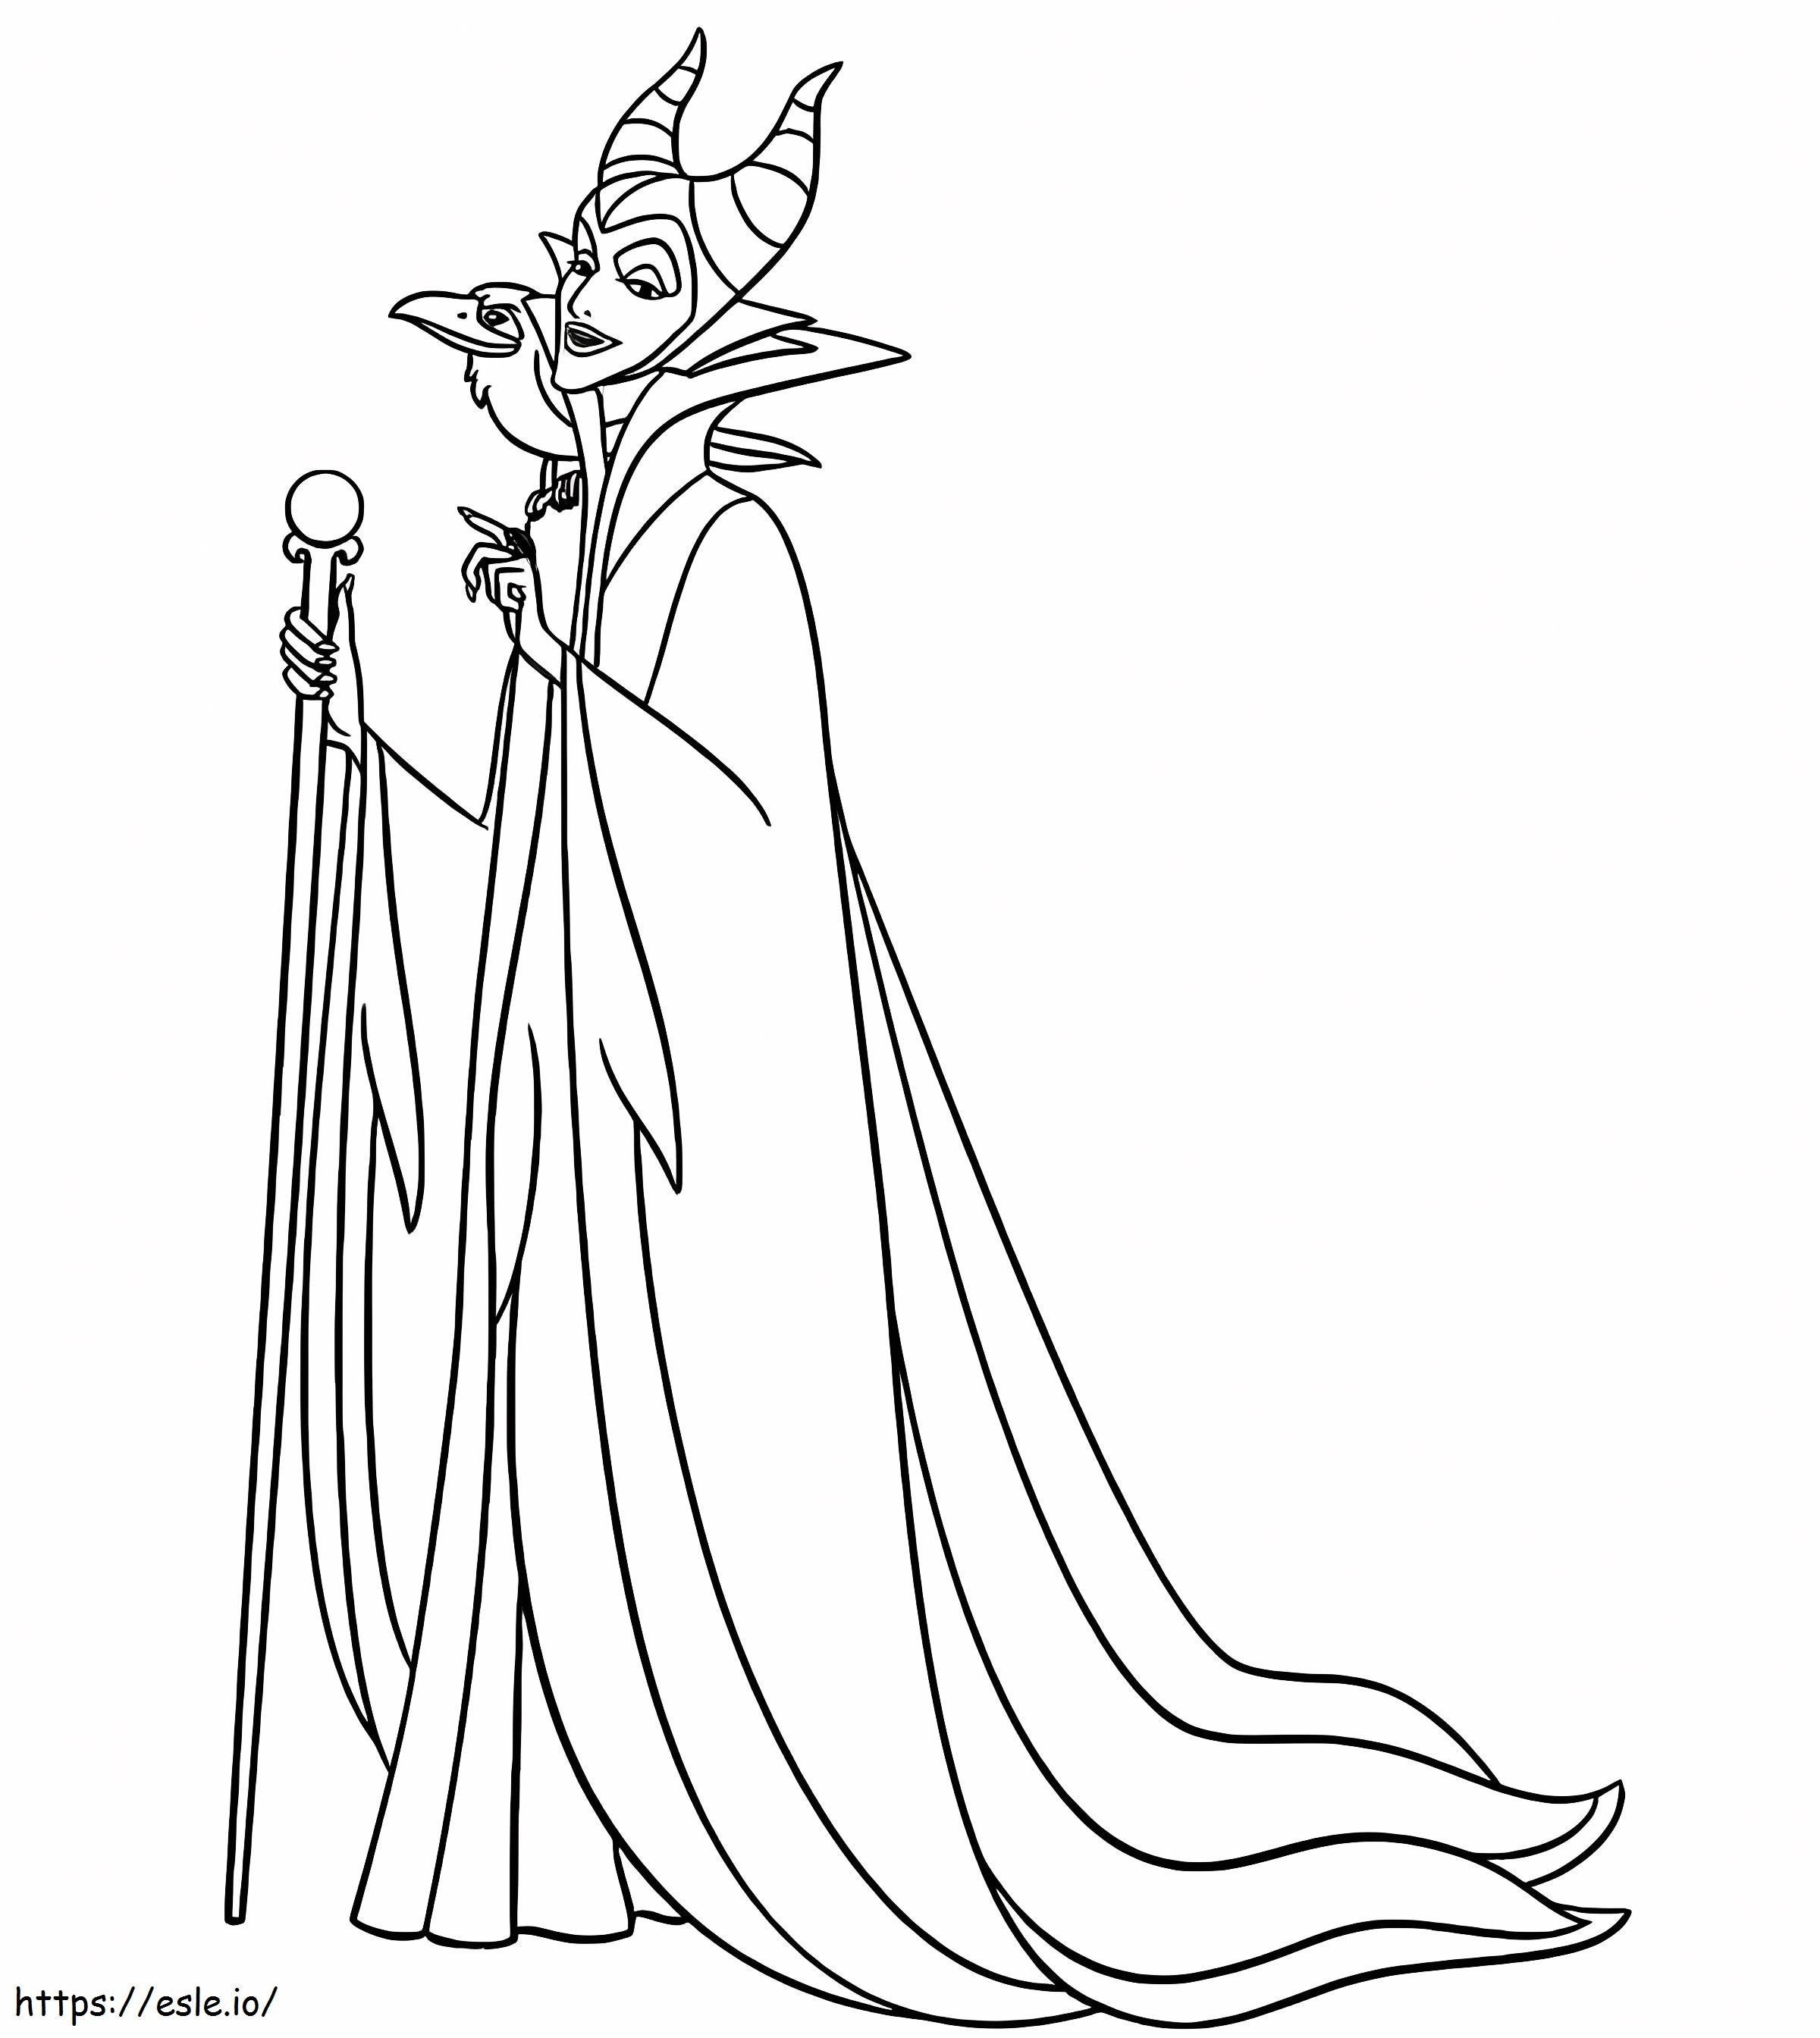 Evil Cartoon Maleficent coloring page